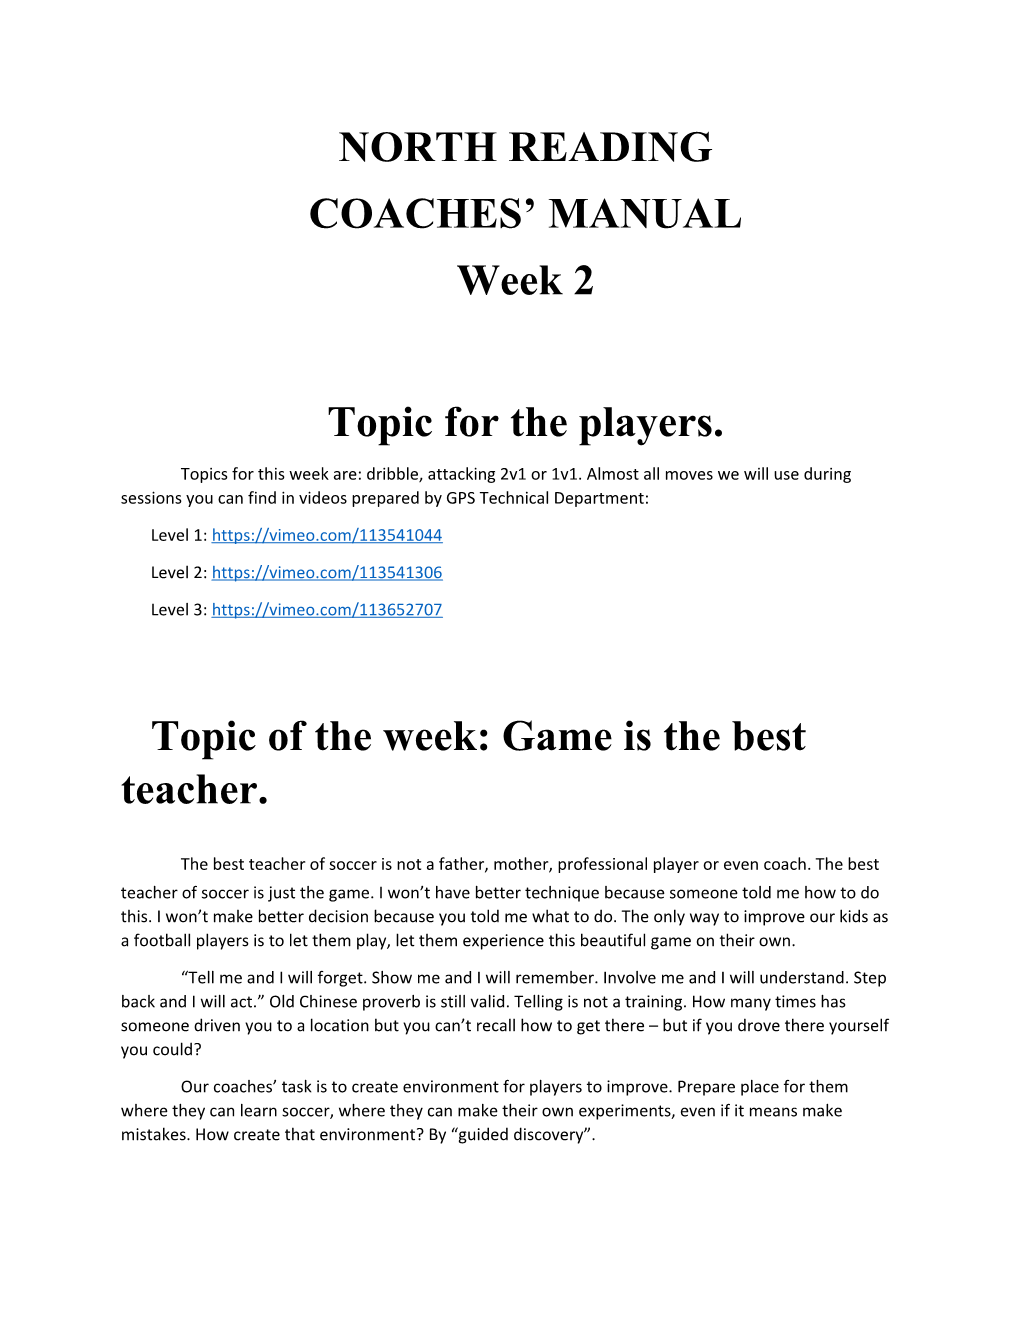 Topic for the Players